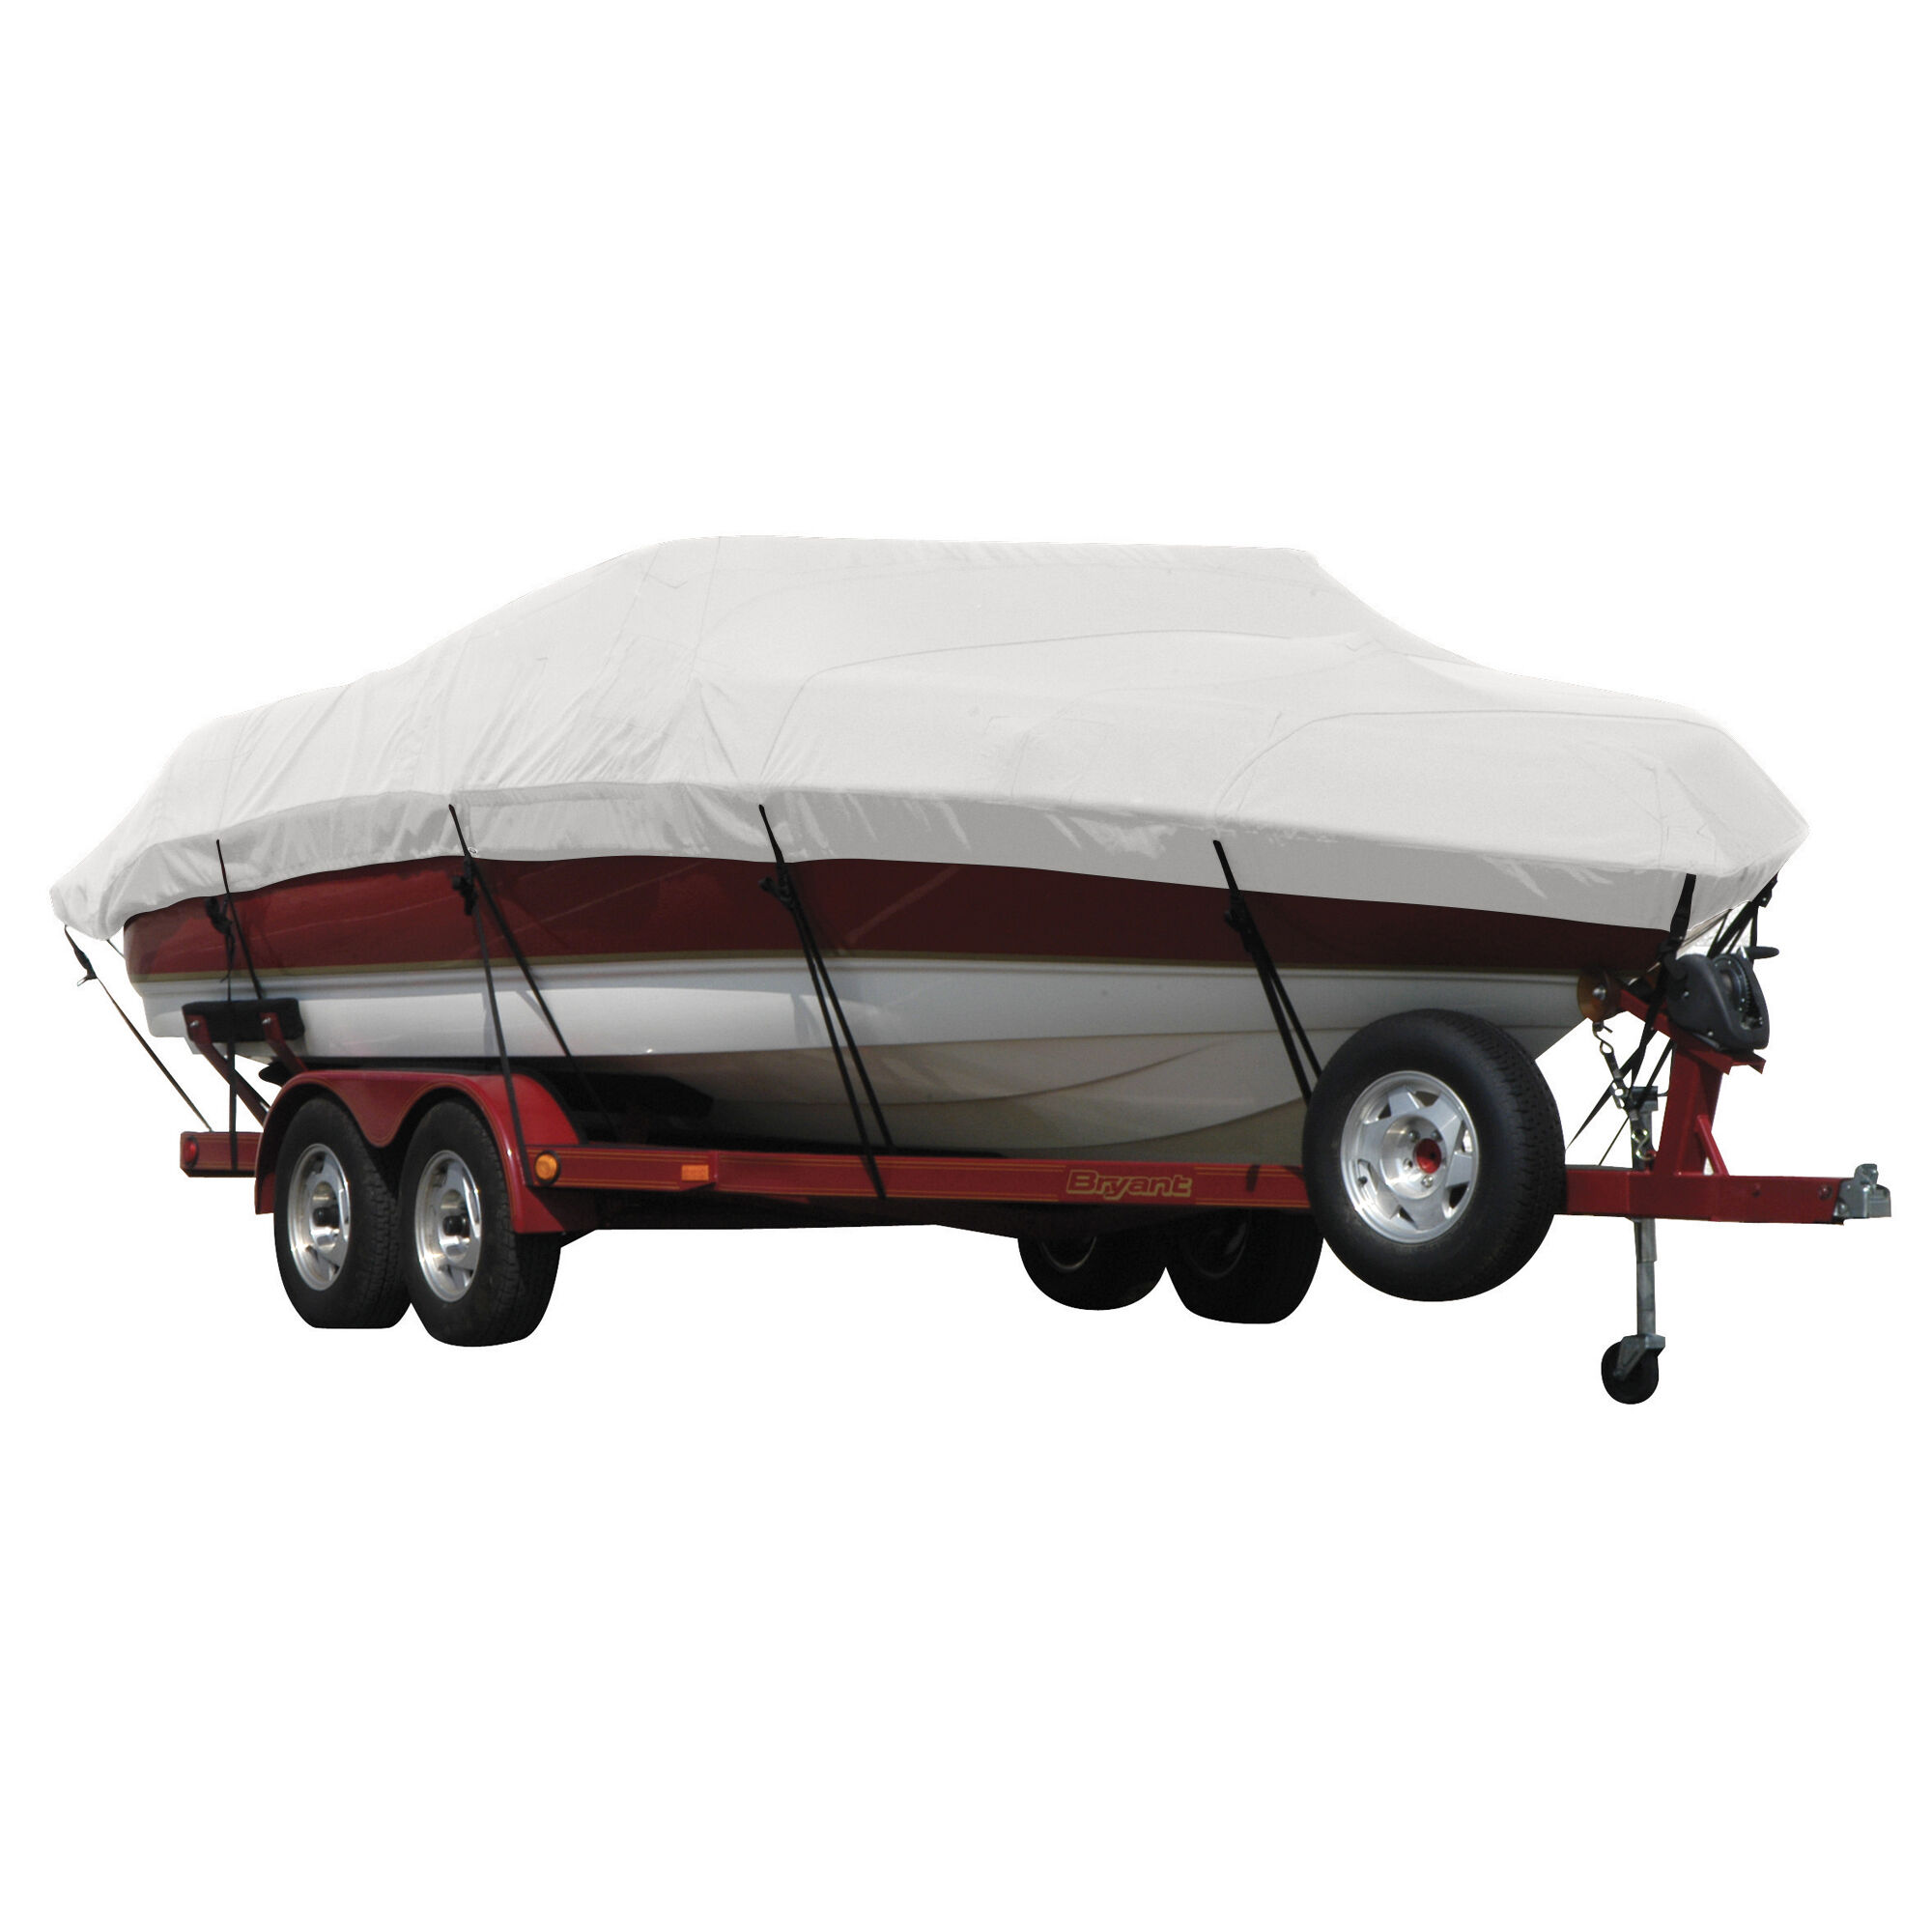 Covermate Exact Fit Sunbrella Boat Cover for Procraft 180 180 Side Console w/ Shield w/ Port Trolling Motor O/B. Natural in Natural Tan